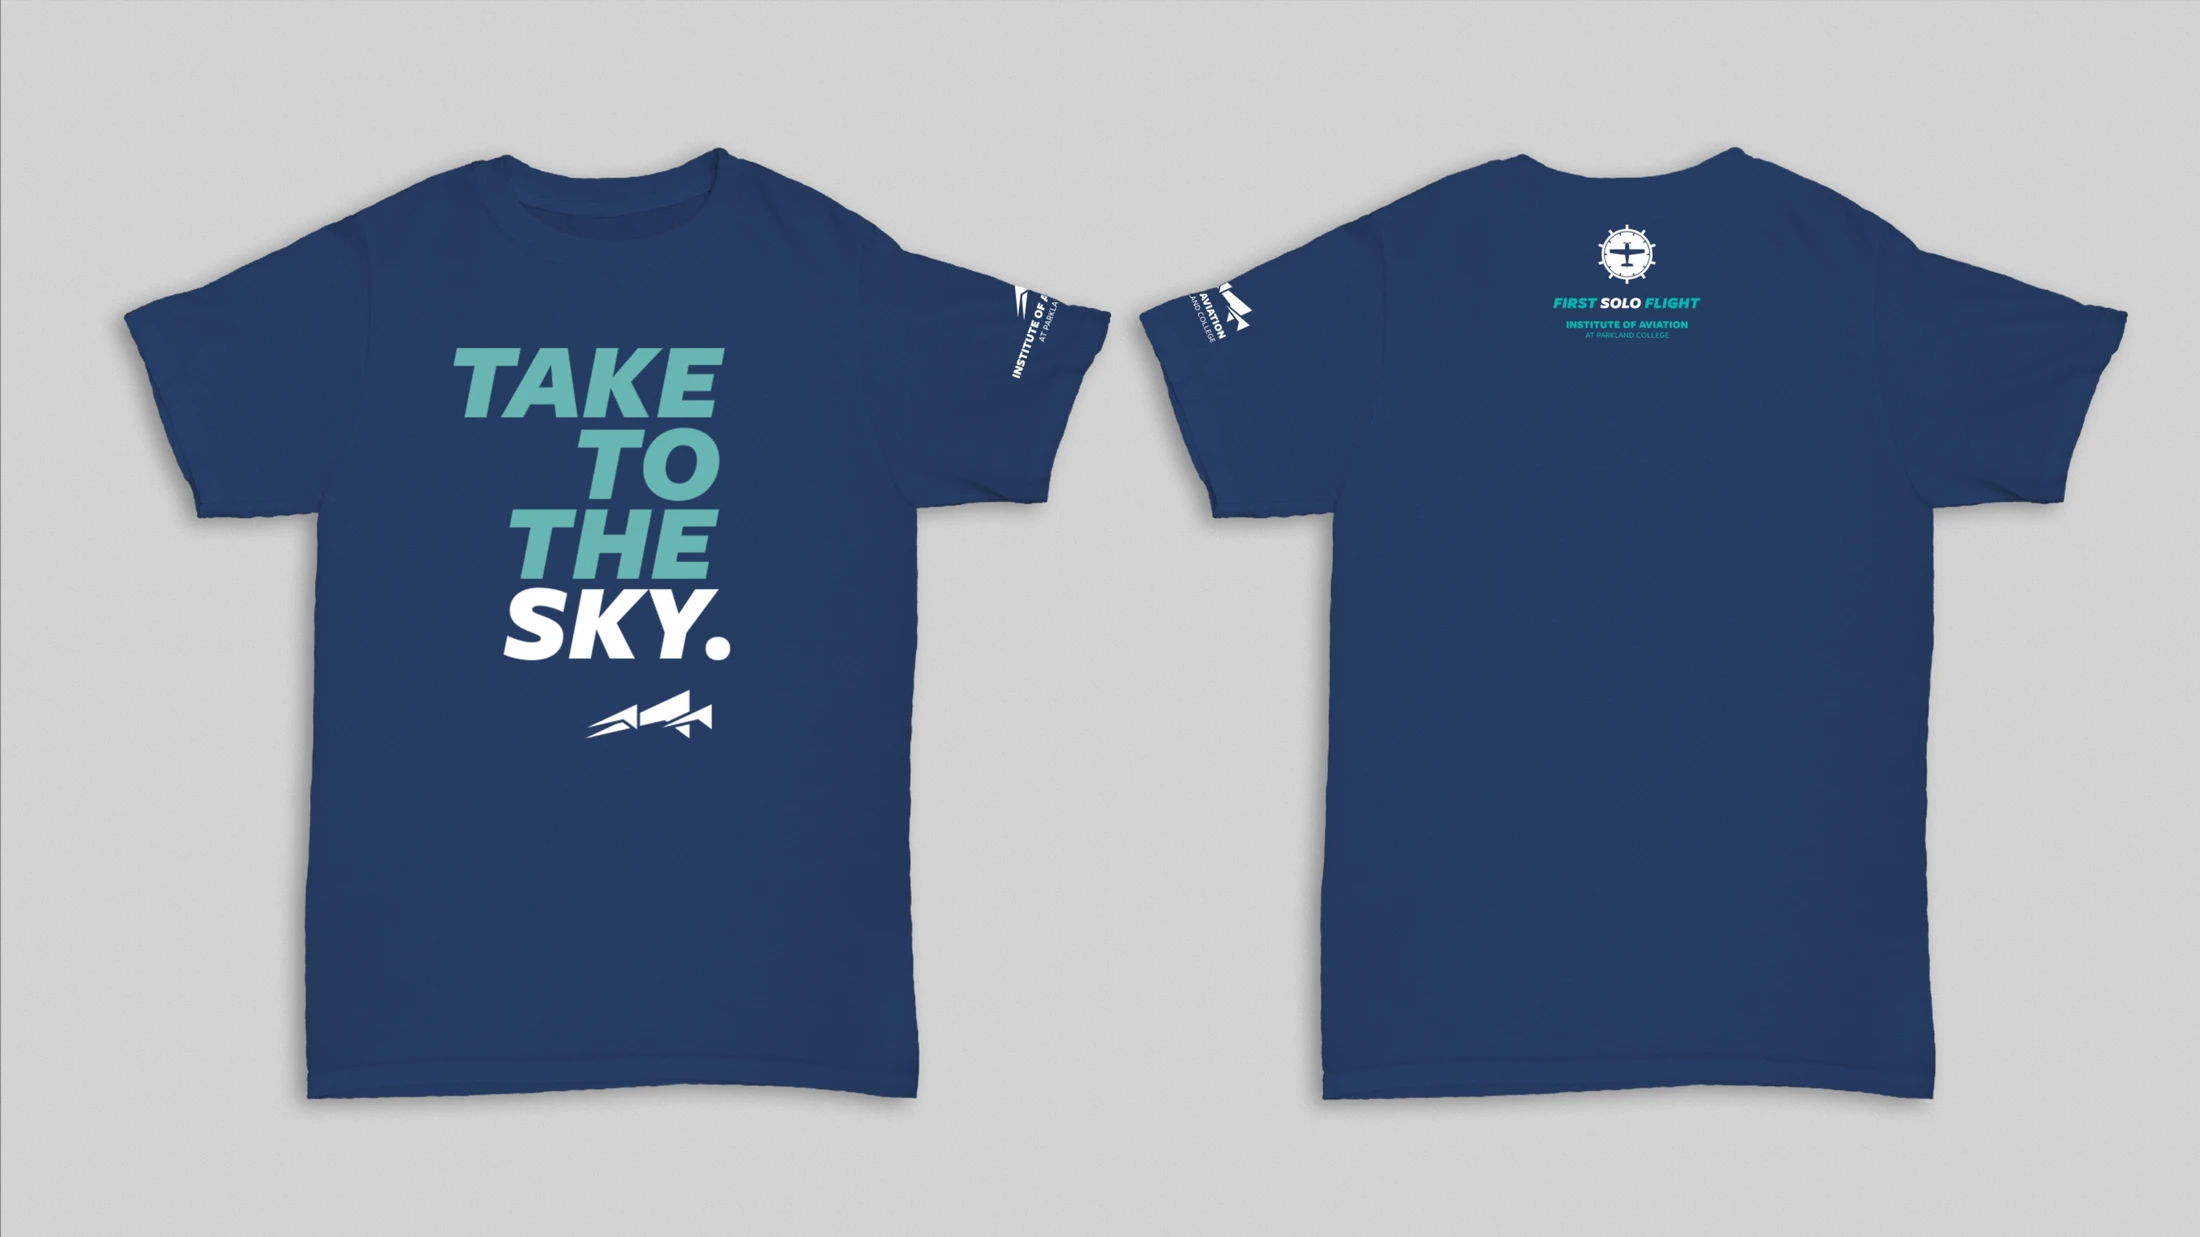 A photo of the take to they sky tshirt from the Institute of Aviation.